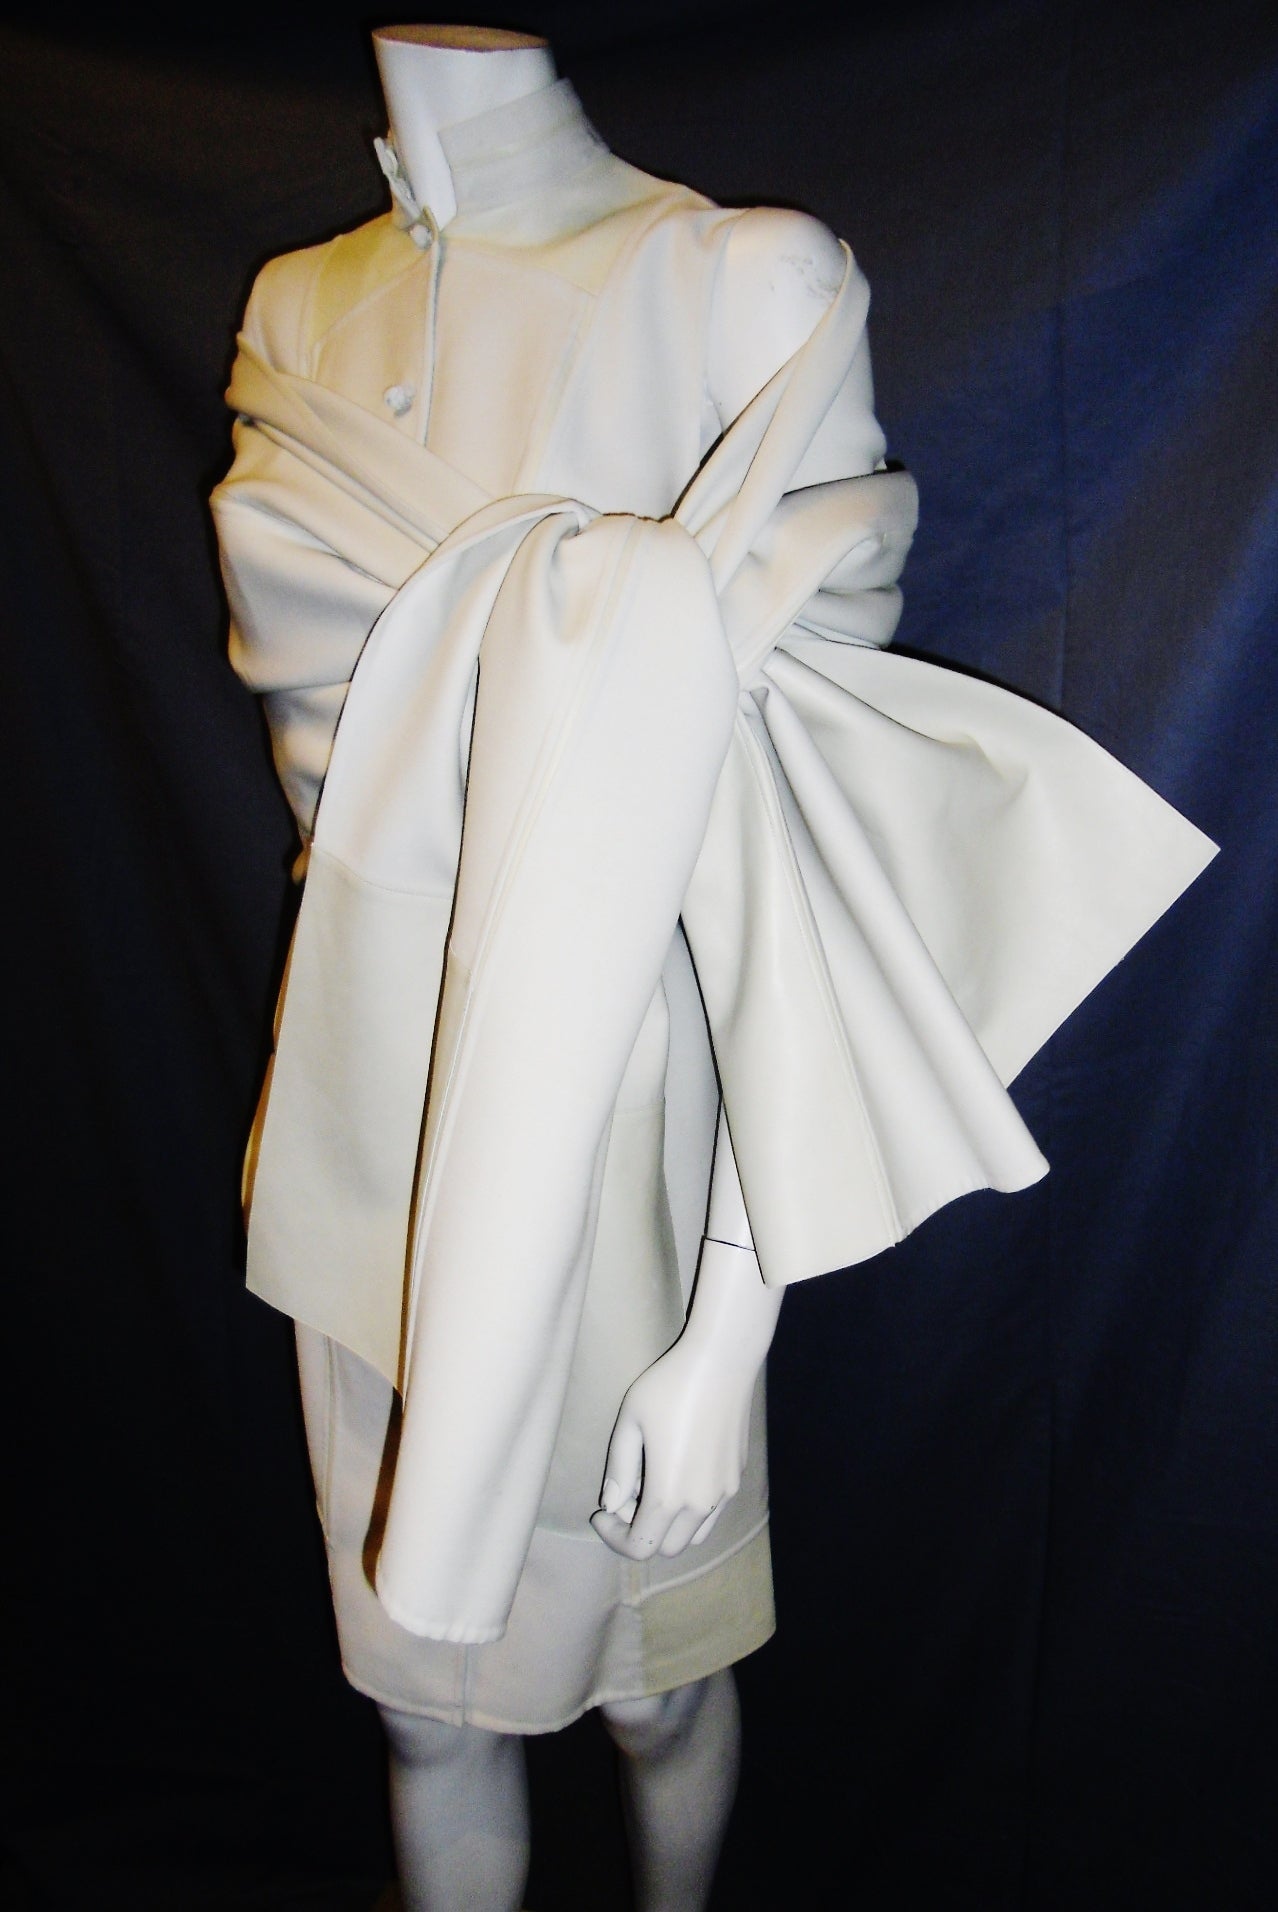 $6400 tag beautiful last of Ralph Rucci winter white/ creme wool dress with lamb leather inlay. French knots front closure.  Additional huge wool shawl with leather. Stunning statement outfit.
Size 10.
Please refer to measurements :
Bust: 40